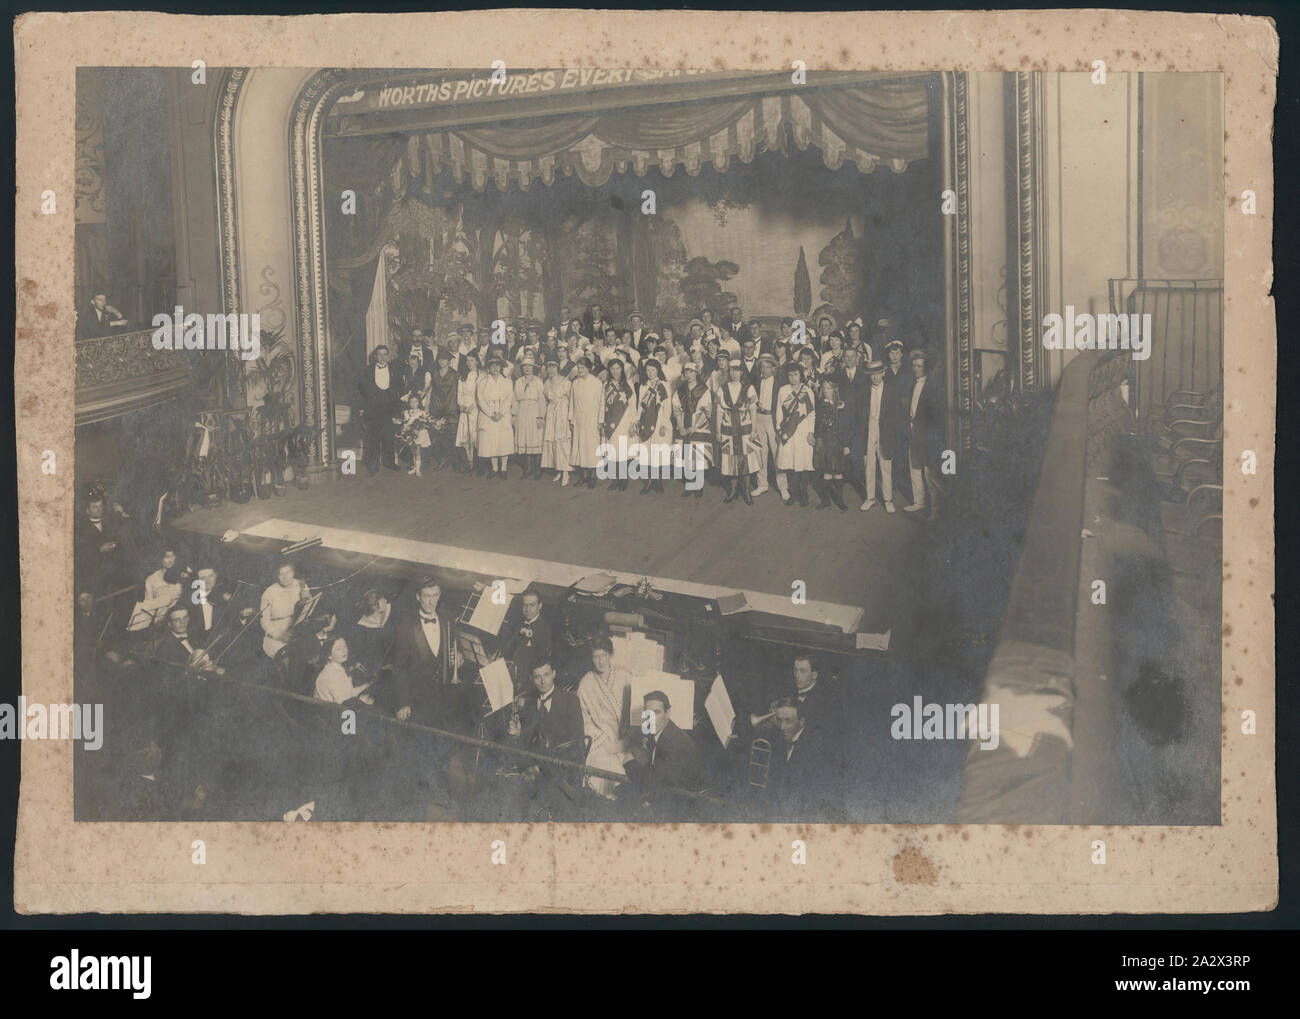 Photograph - Kodak Australasia Limited, Concert, circa 1910s, Black and white photograph of the concert stage and performers at an event held by Kodak Australasia Limited circa 1910s Stock Photo